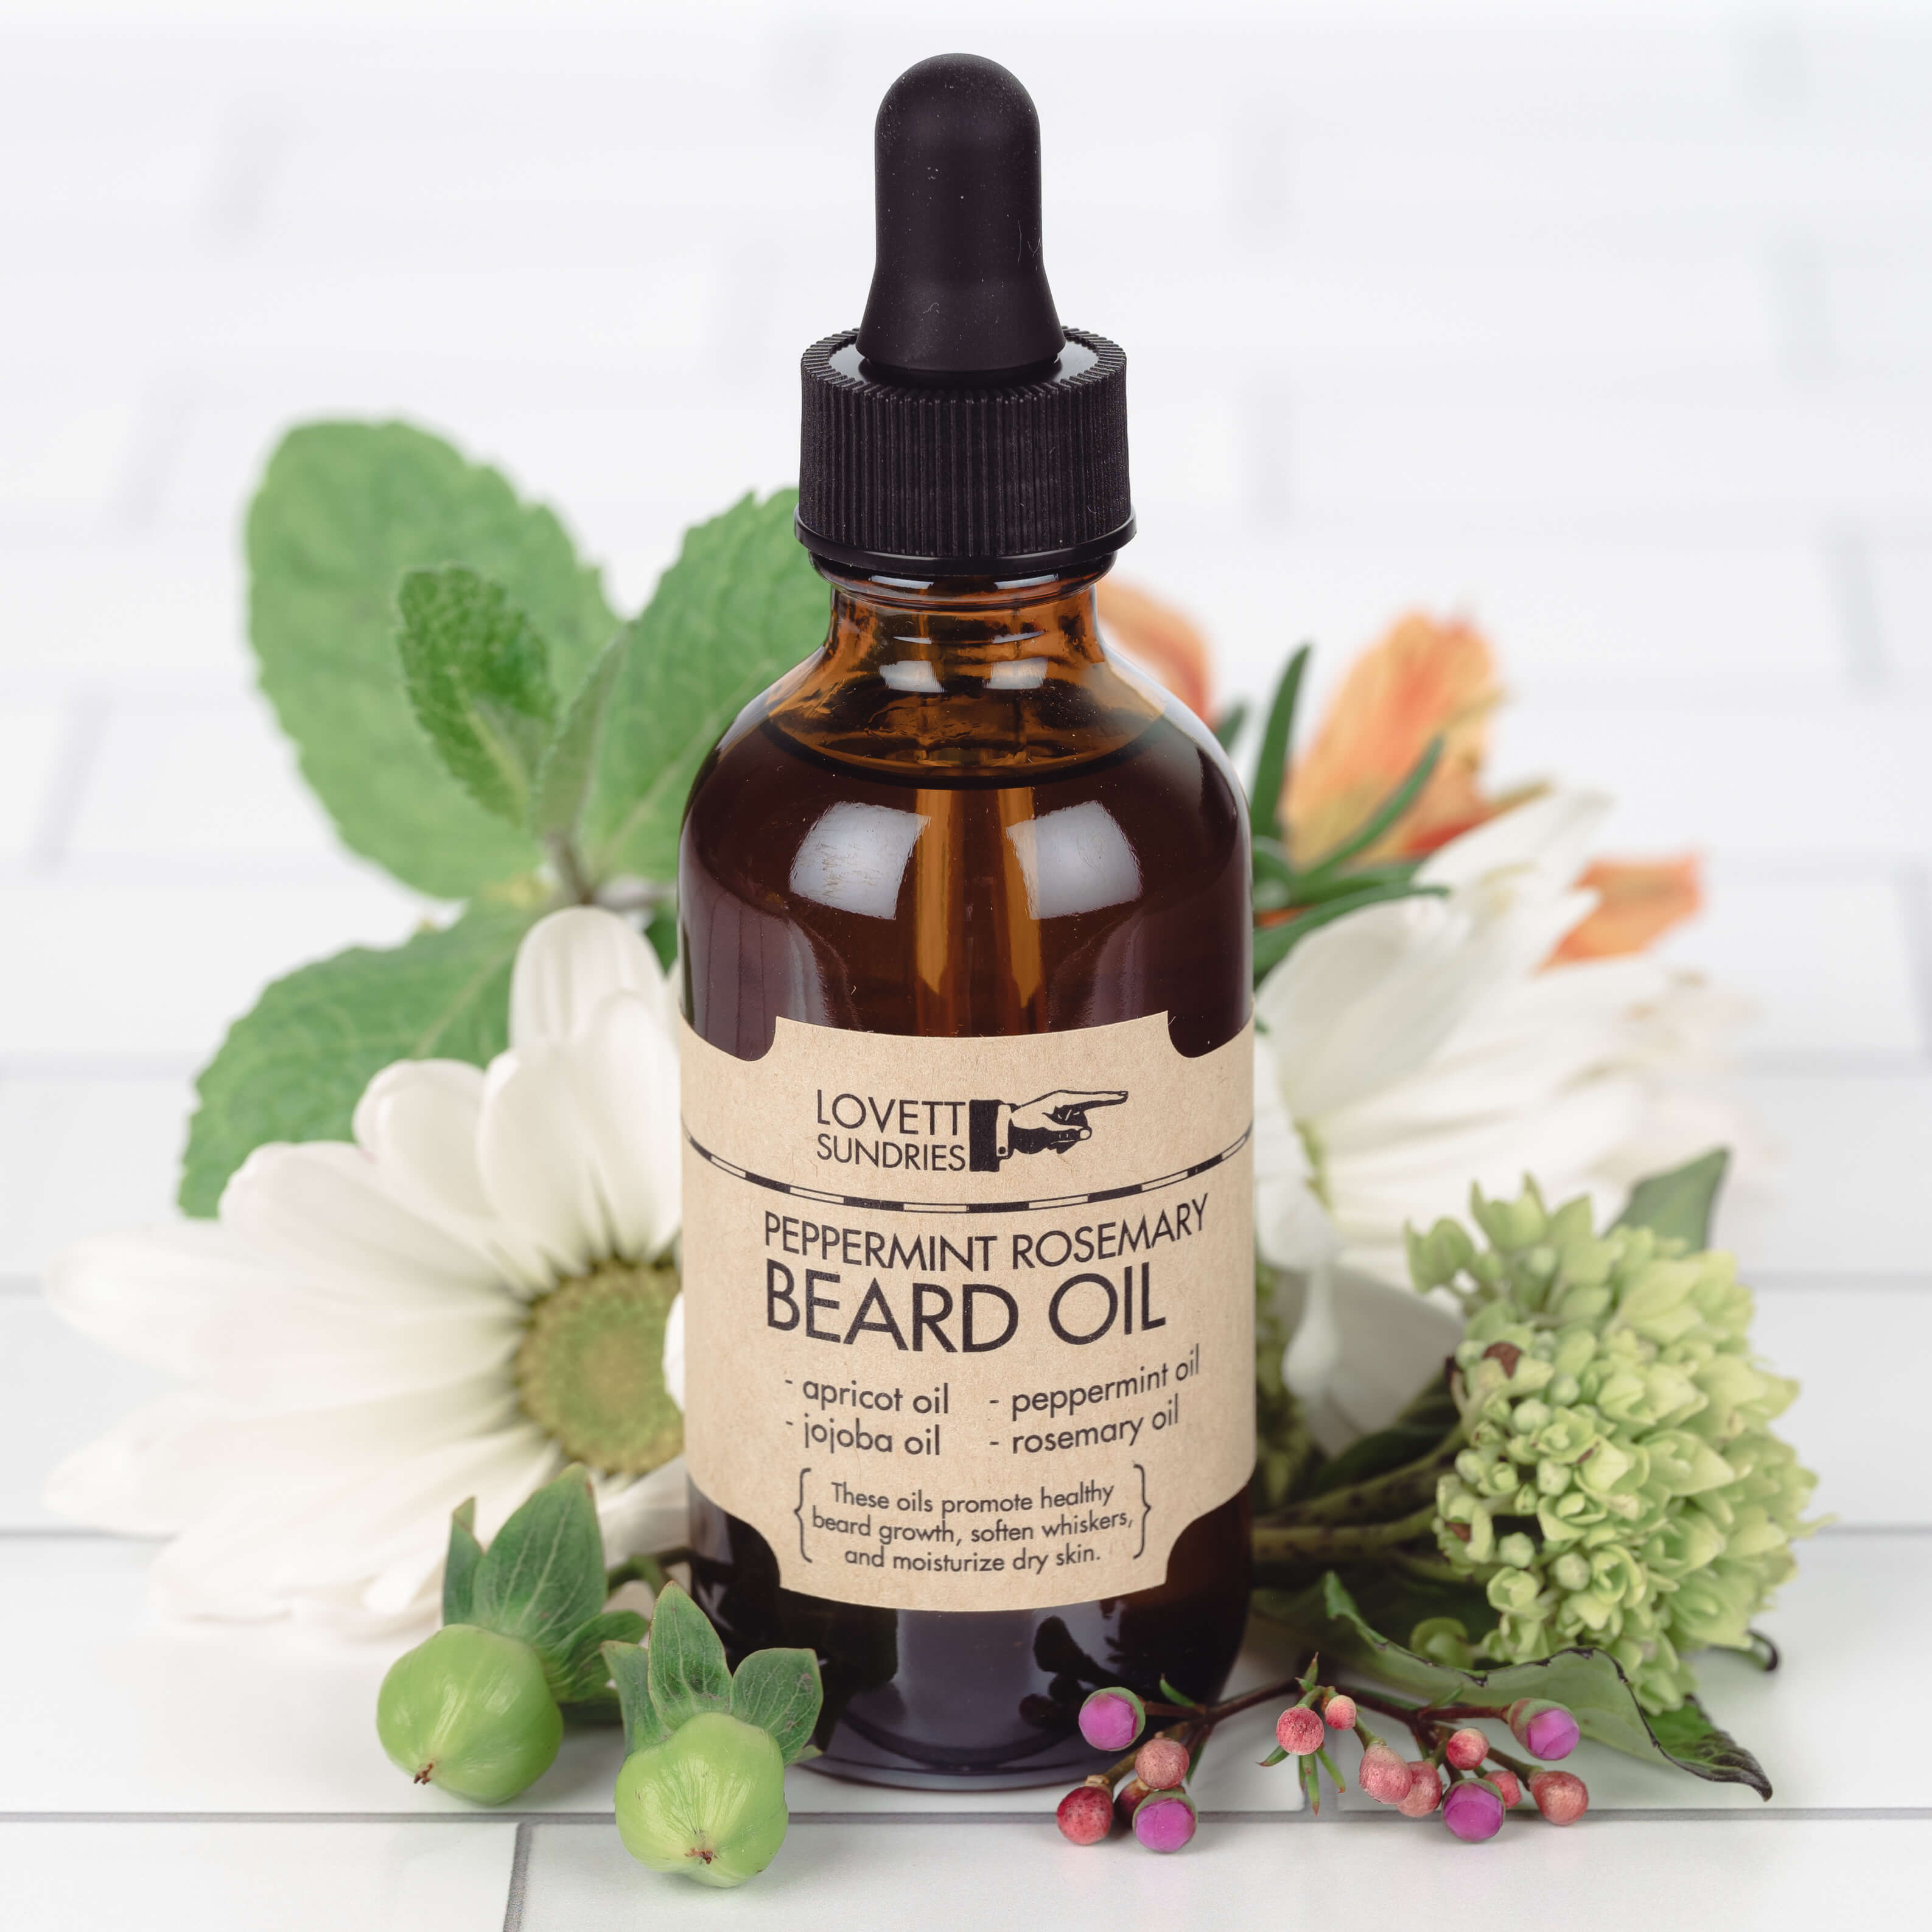 A bottle of peppermint rosemary scented beard oil on top of flowers and plants.